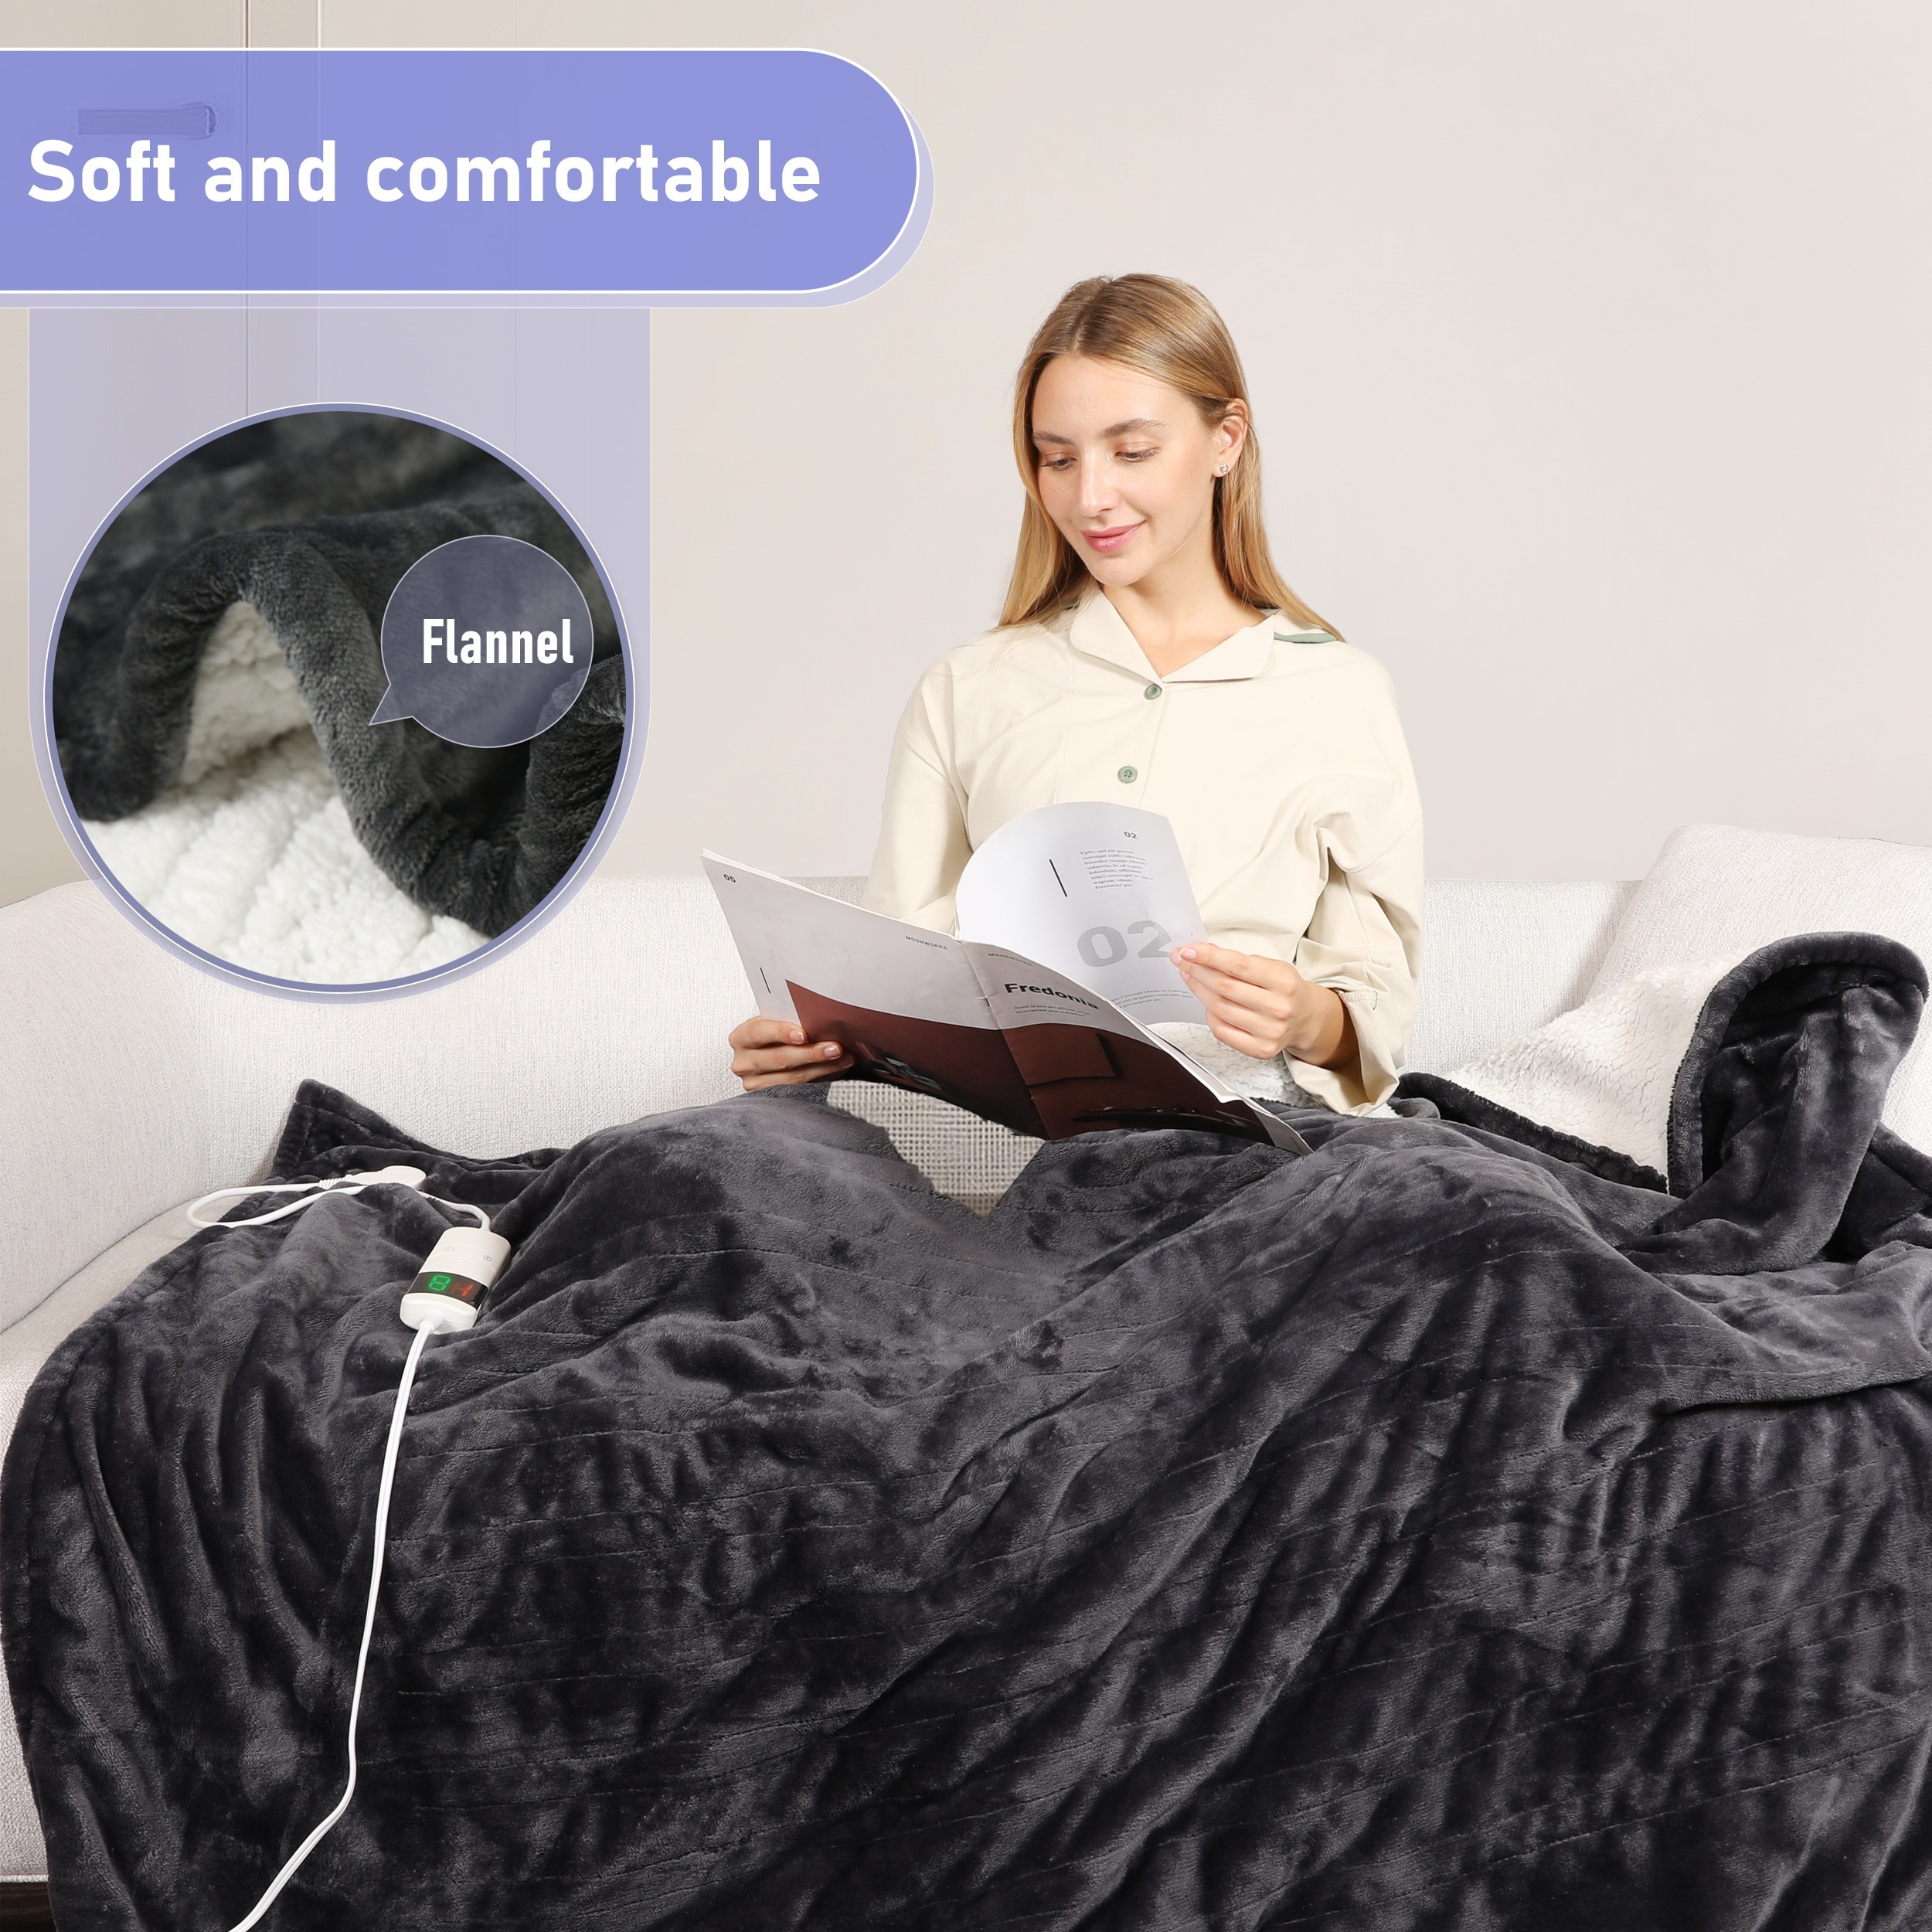 Heated Blanket, Machine Washable Extremely Soft and Comfortable